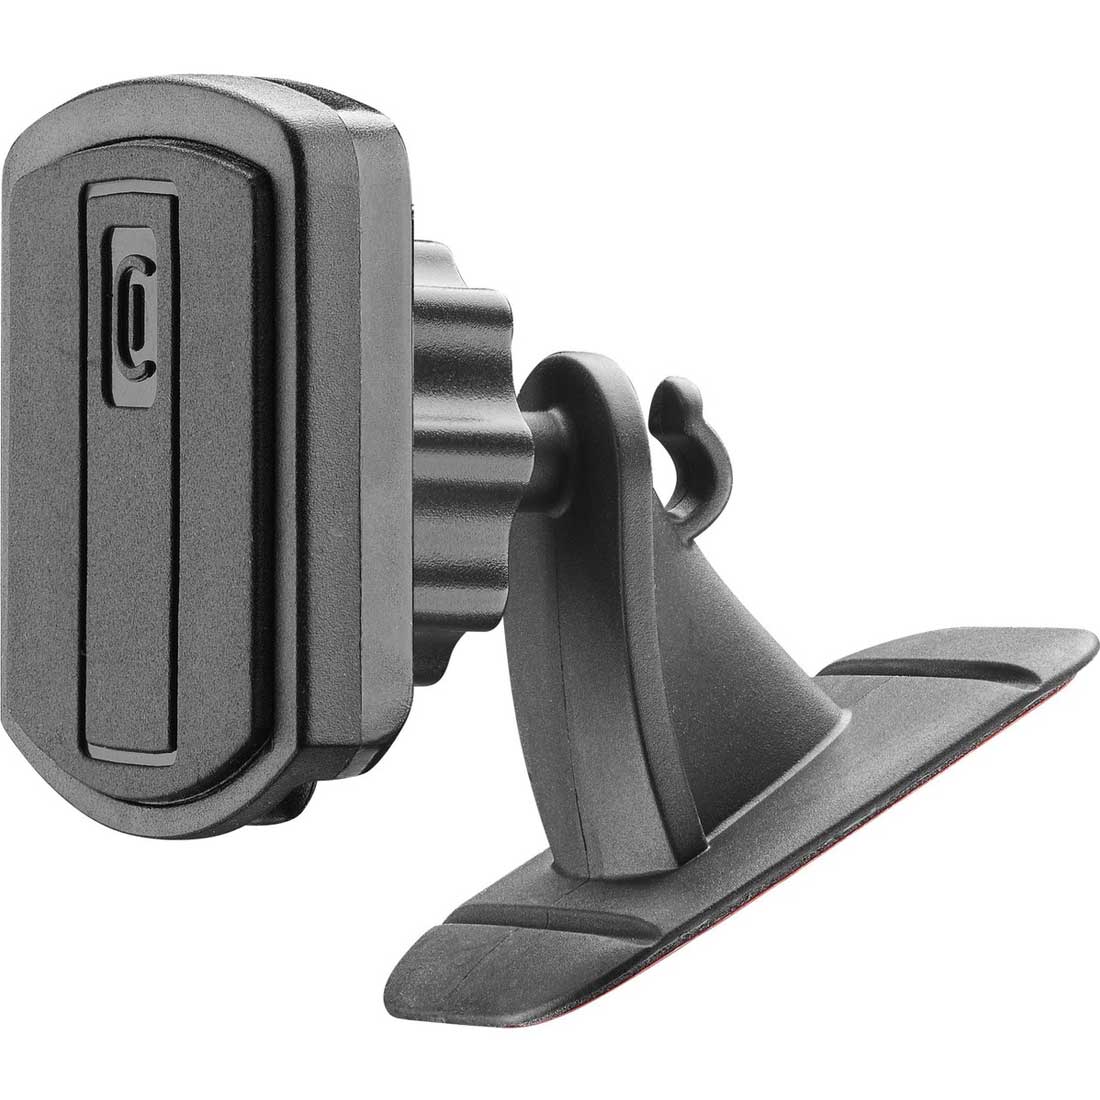 https://www.penboxshop.com/wp-content/uploads/2022/07/Cellularline-In-Car-Holder-Mag-With-Adhesive-Mount-01.jpg